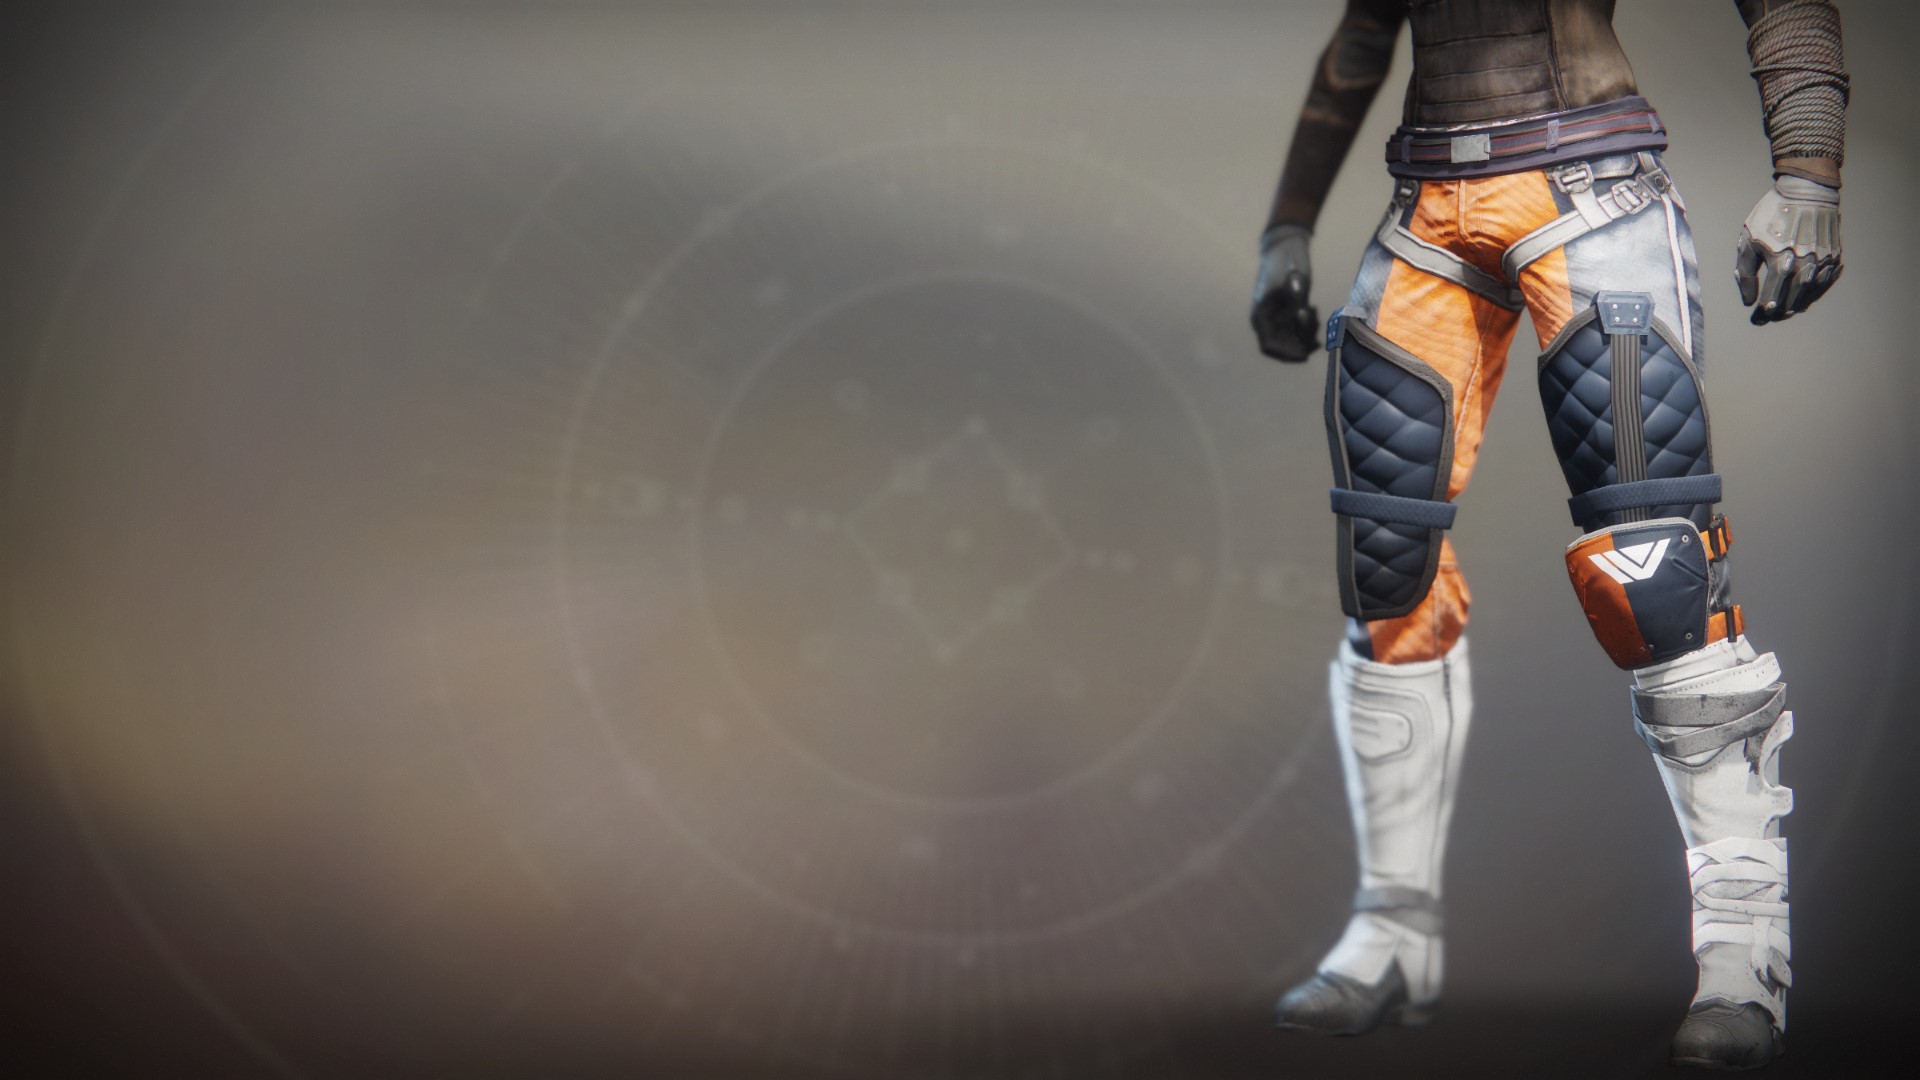 An in-game render of the Steadfast Hunter Ornament.